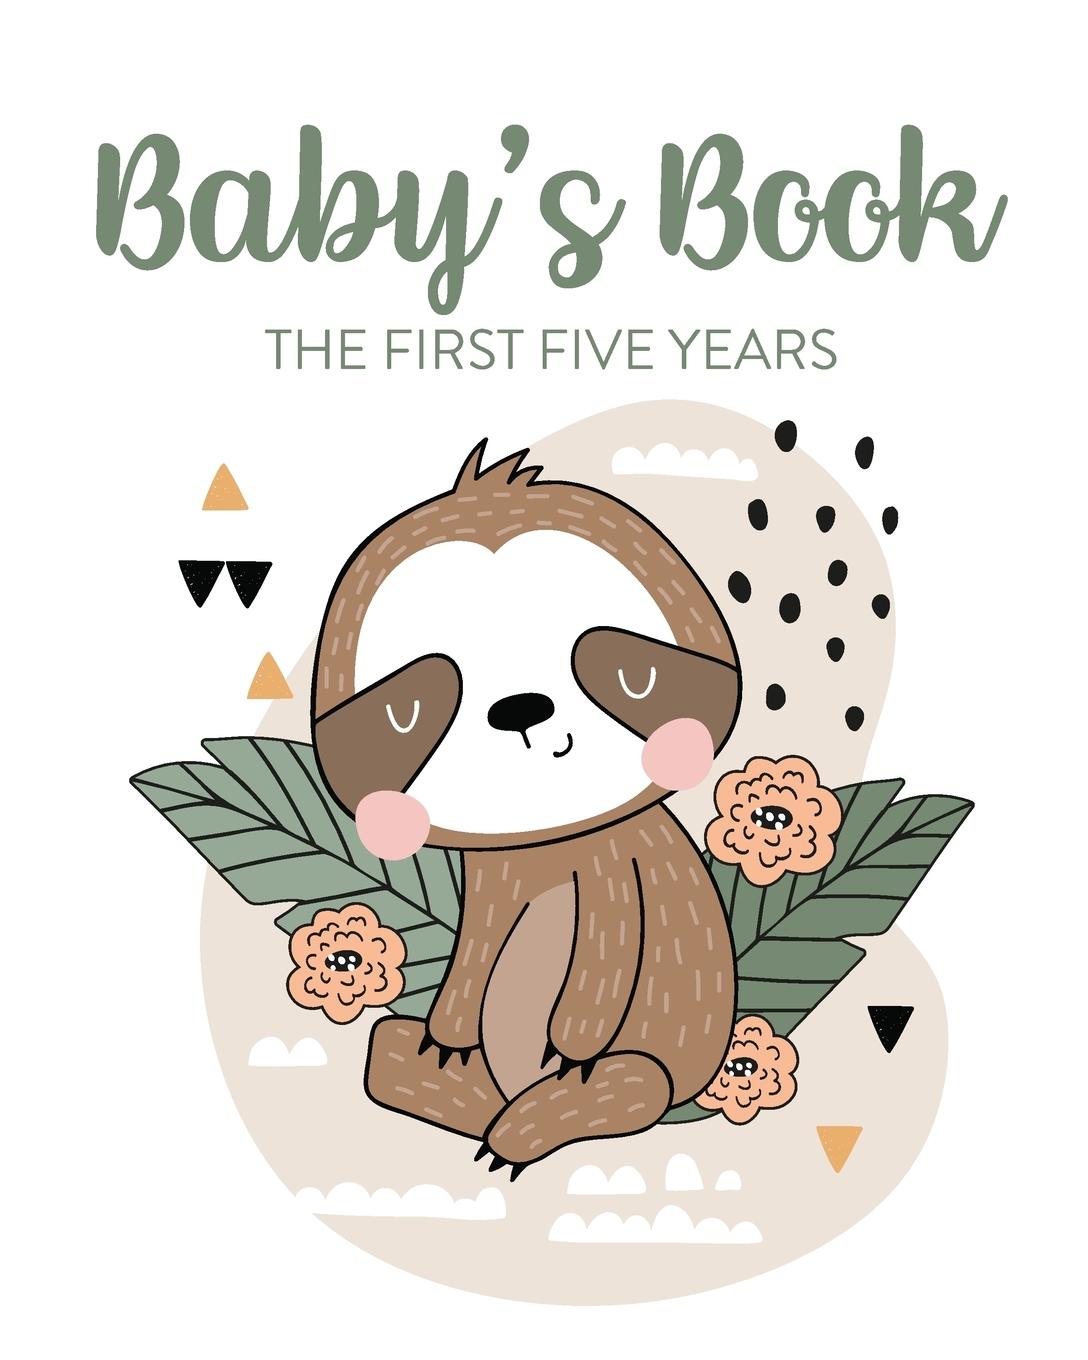 Carte Baby's Book The First Five Years 